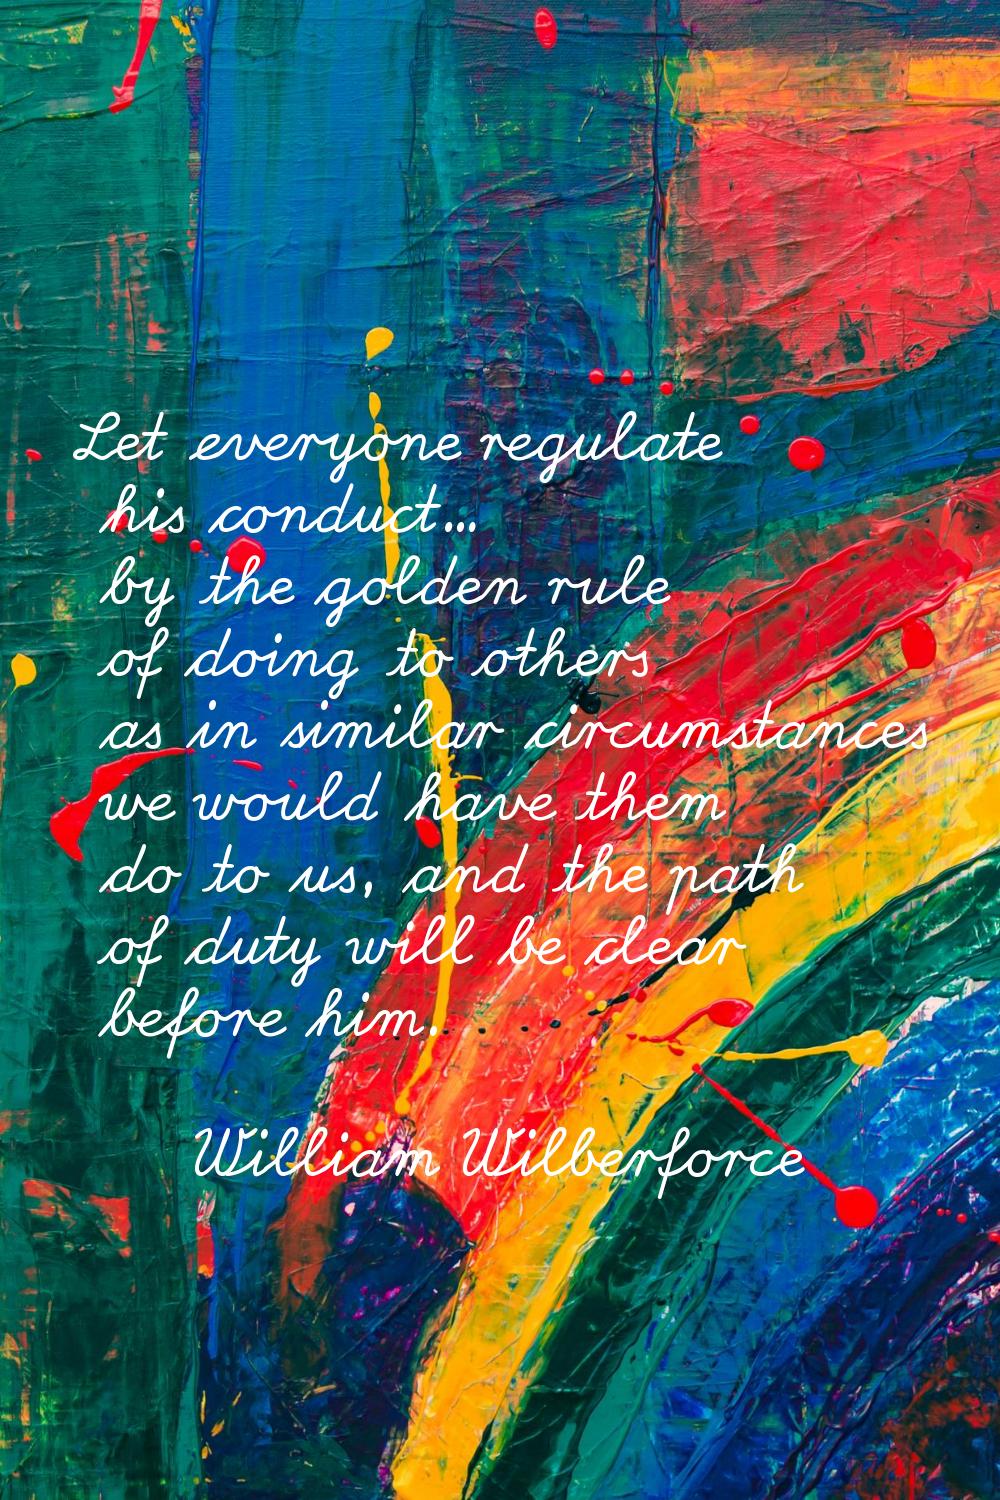 Let everyone regulate his conduct... by the golden rule of doing to others as in similar circumstan